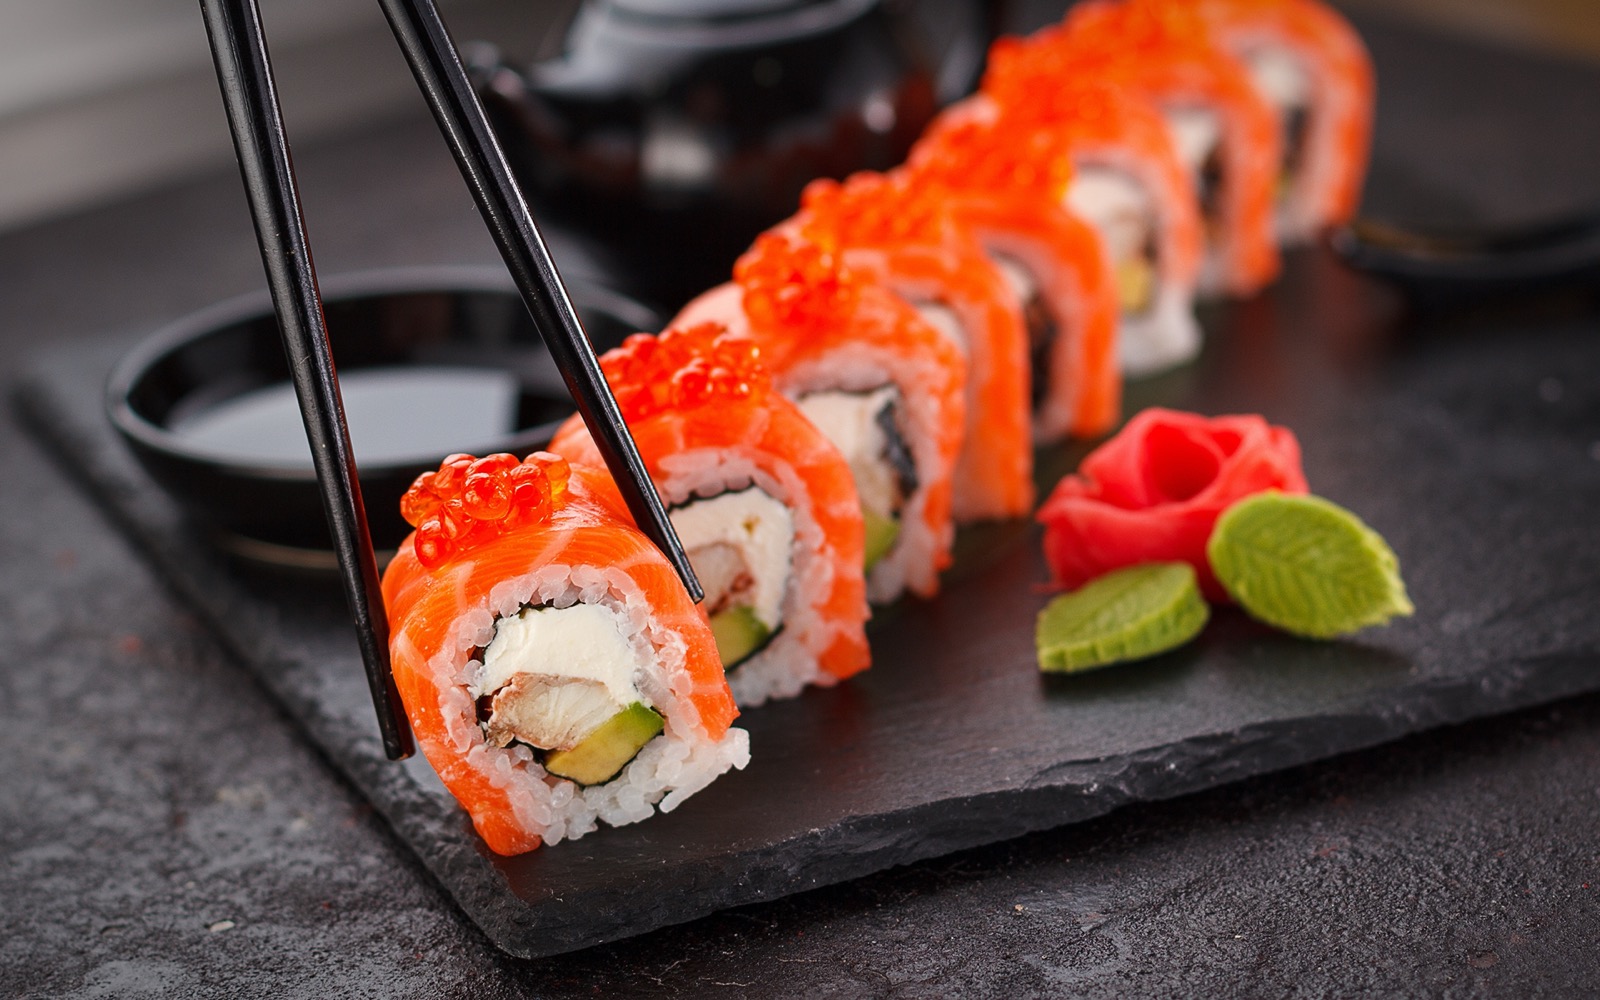 We Know Which Decade of Life You’re in Based on This Food Test Sushi